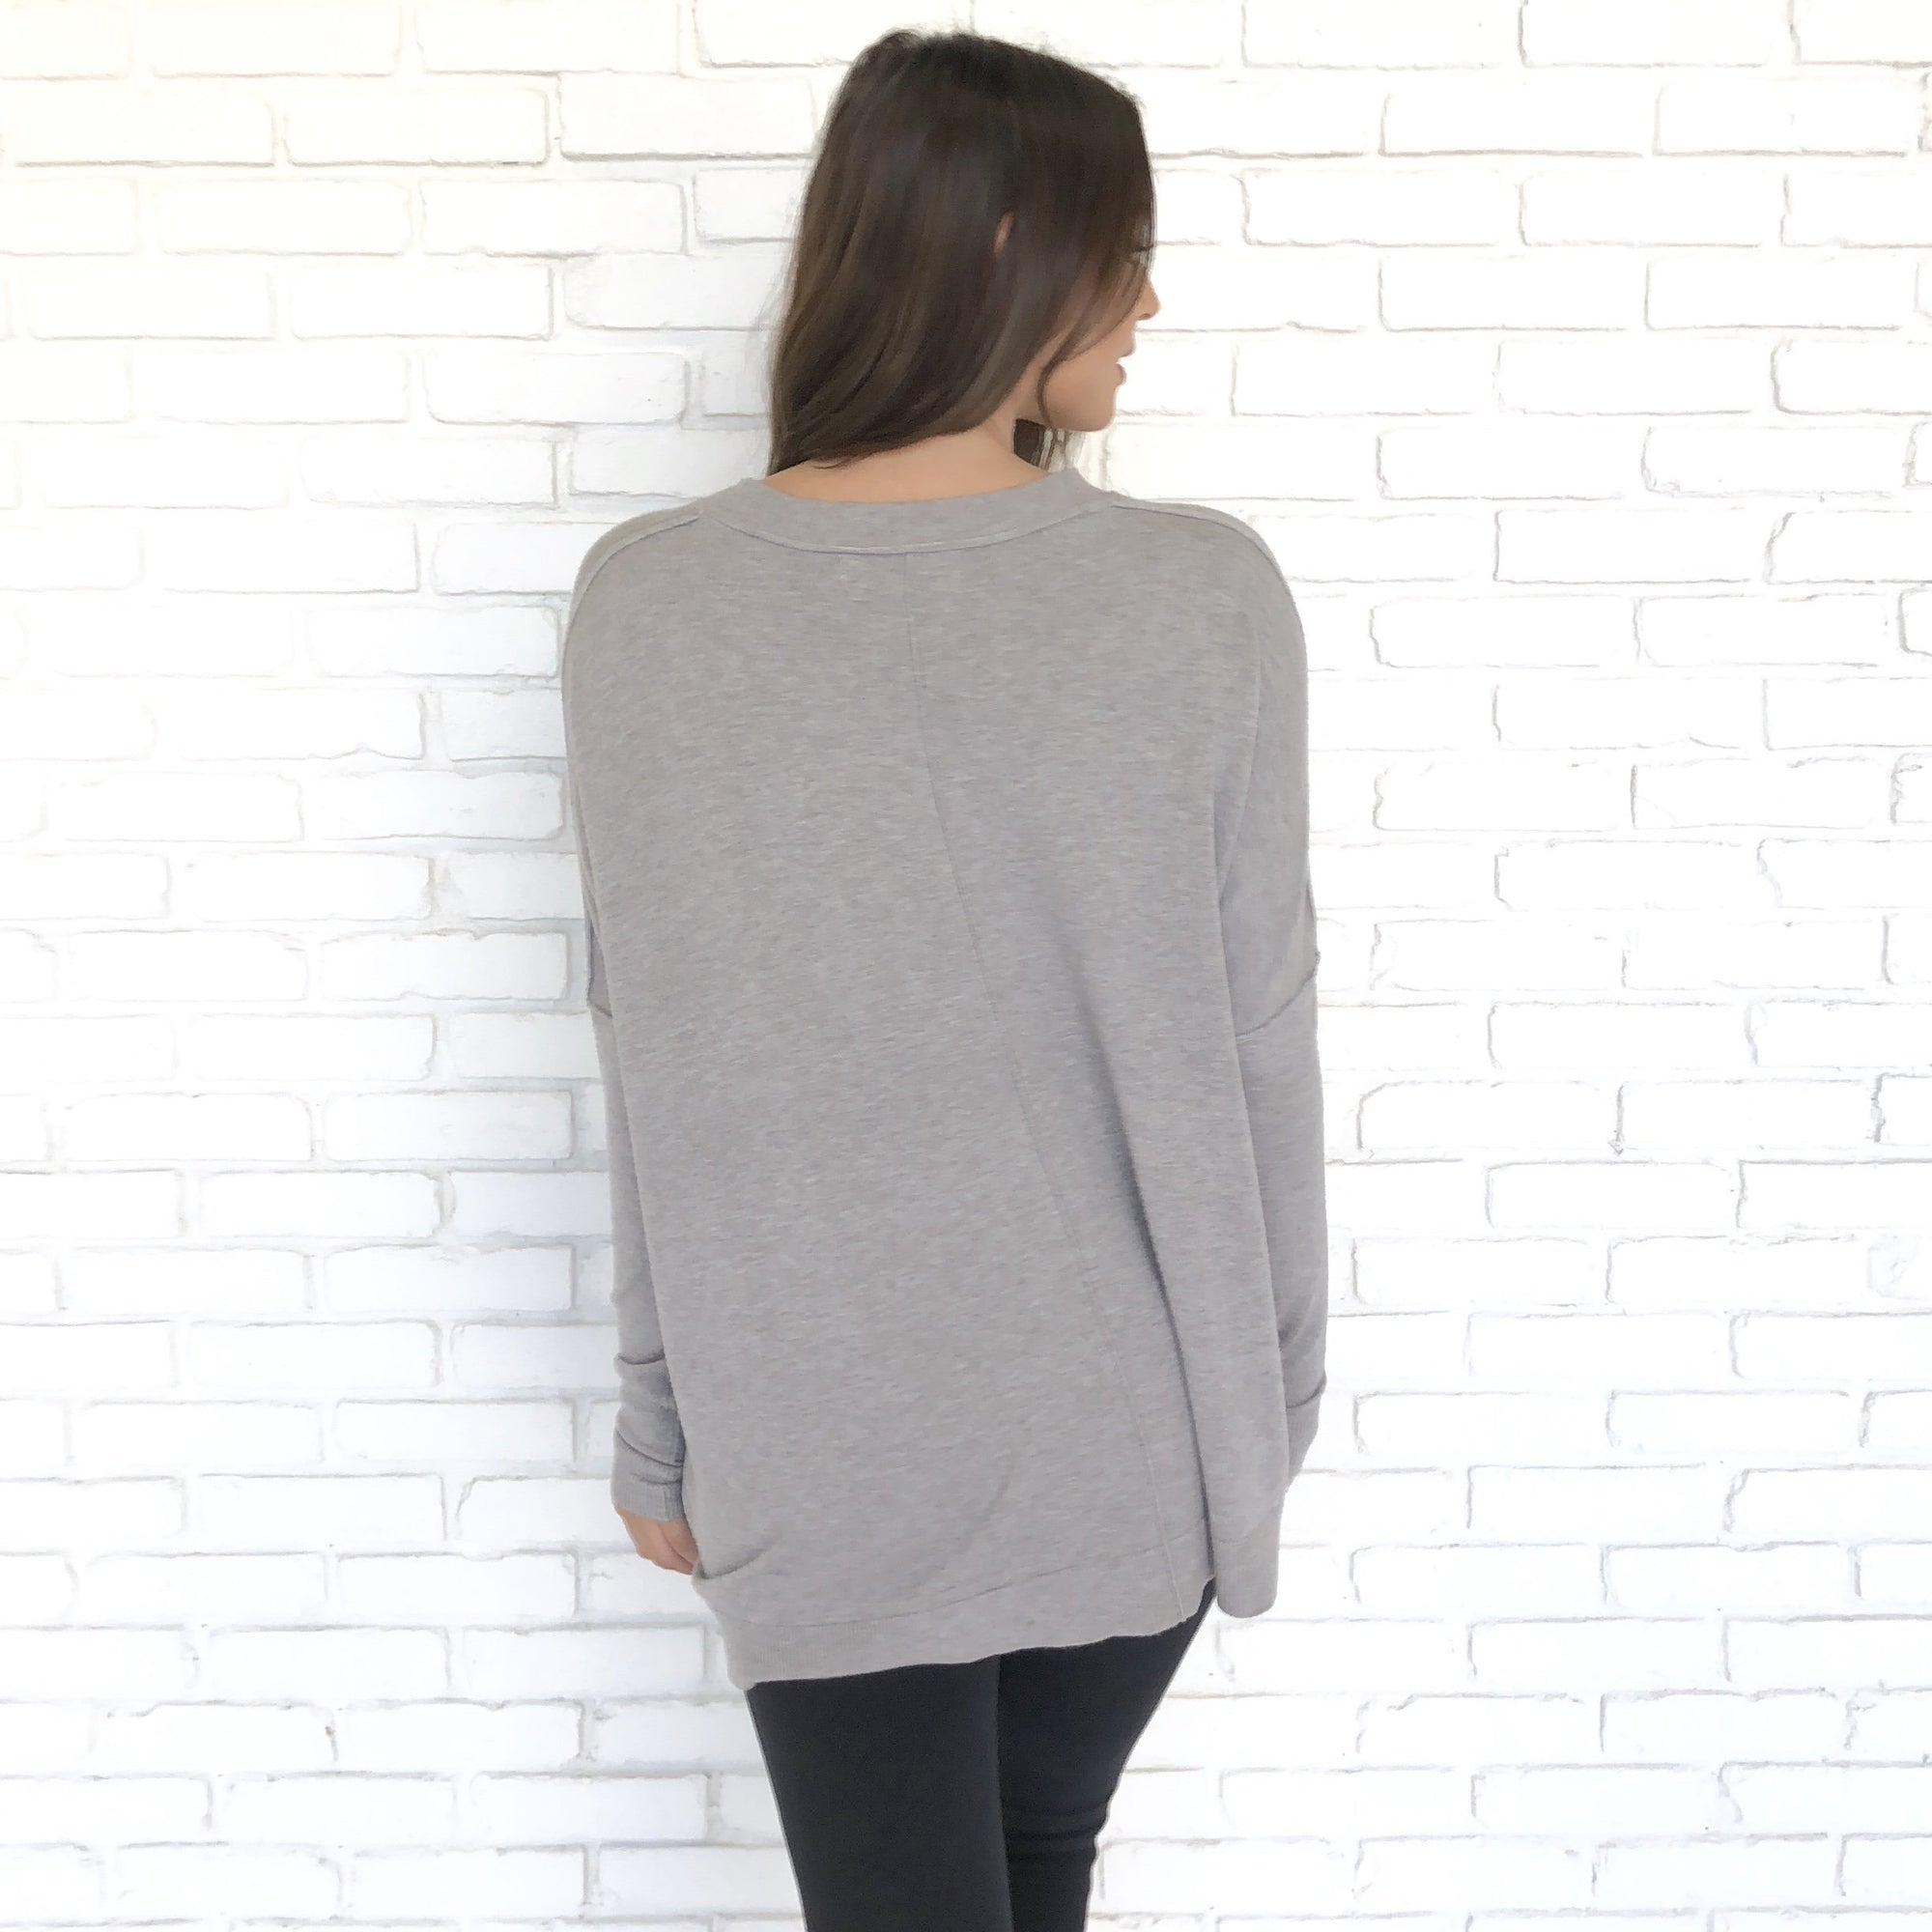 Soft To The Touch Grey Sweater - Dainty Hooligan